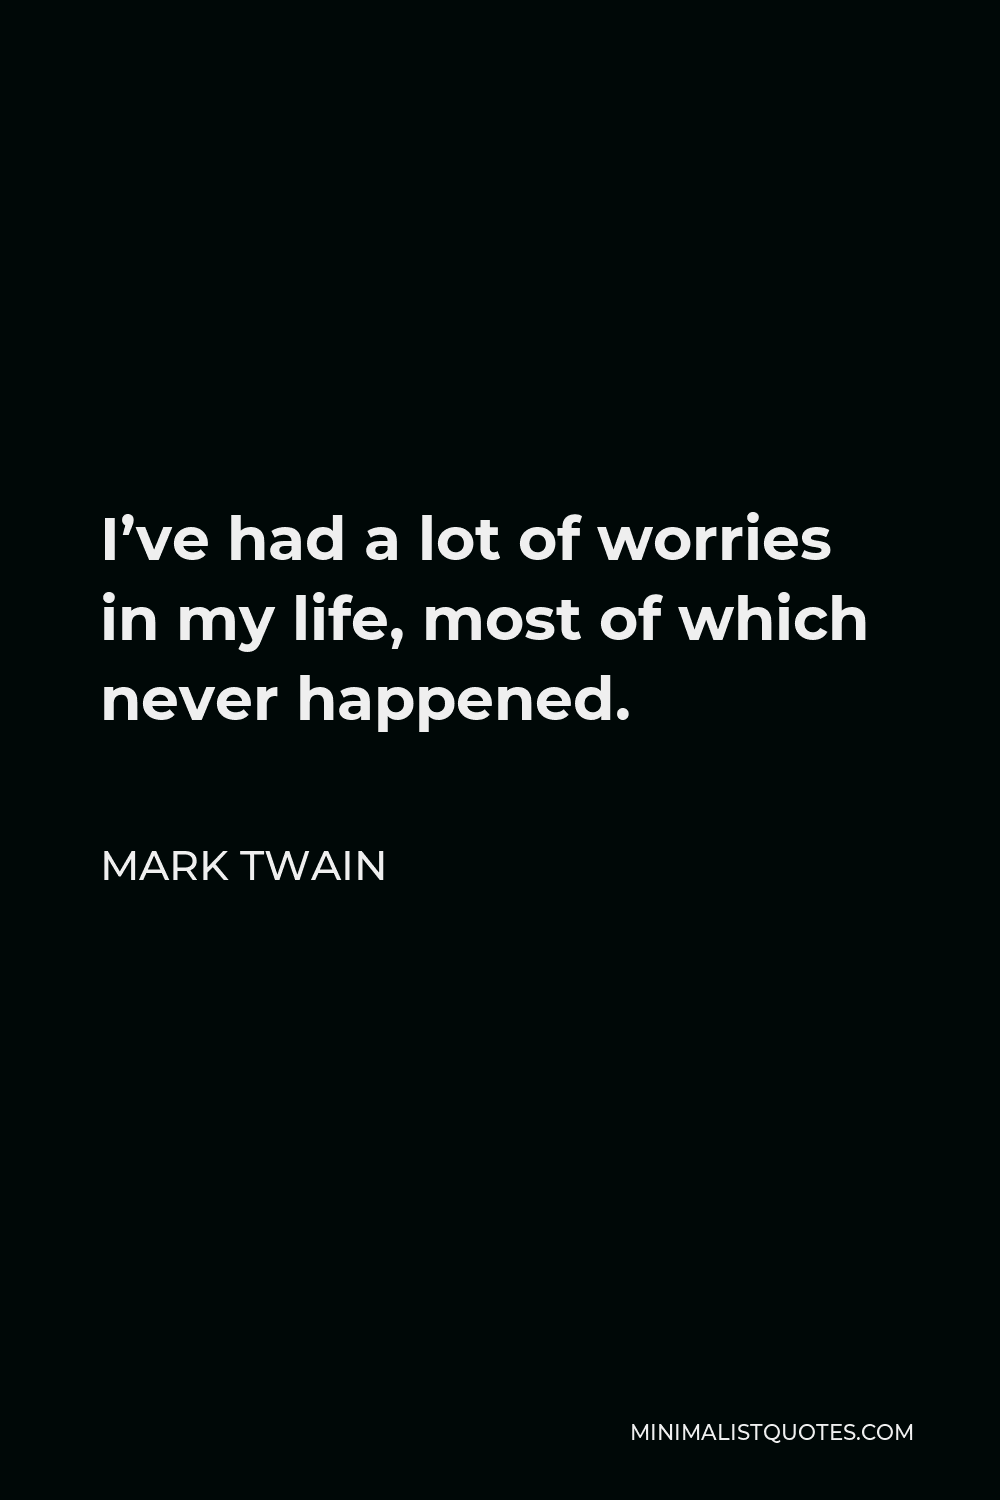 Mark Twain Quote I've Had A Lot Of Worries - Mark Twain Quote: I've had a lot of worries in my life, most of which